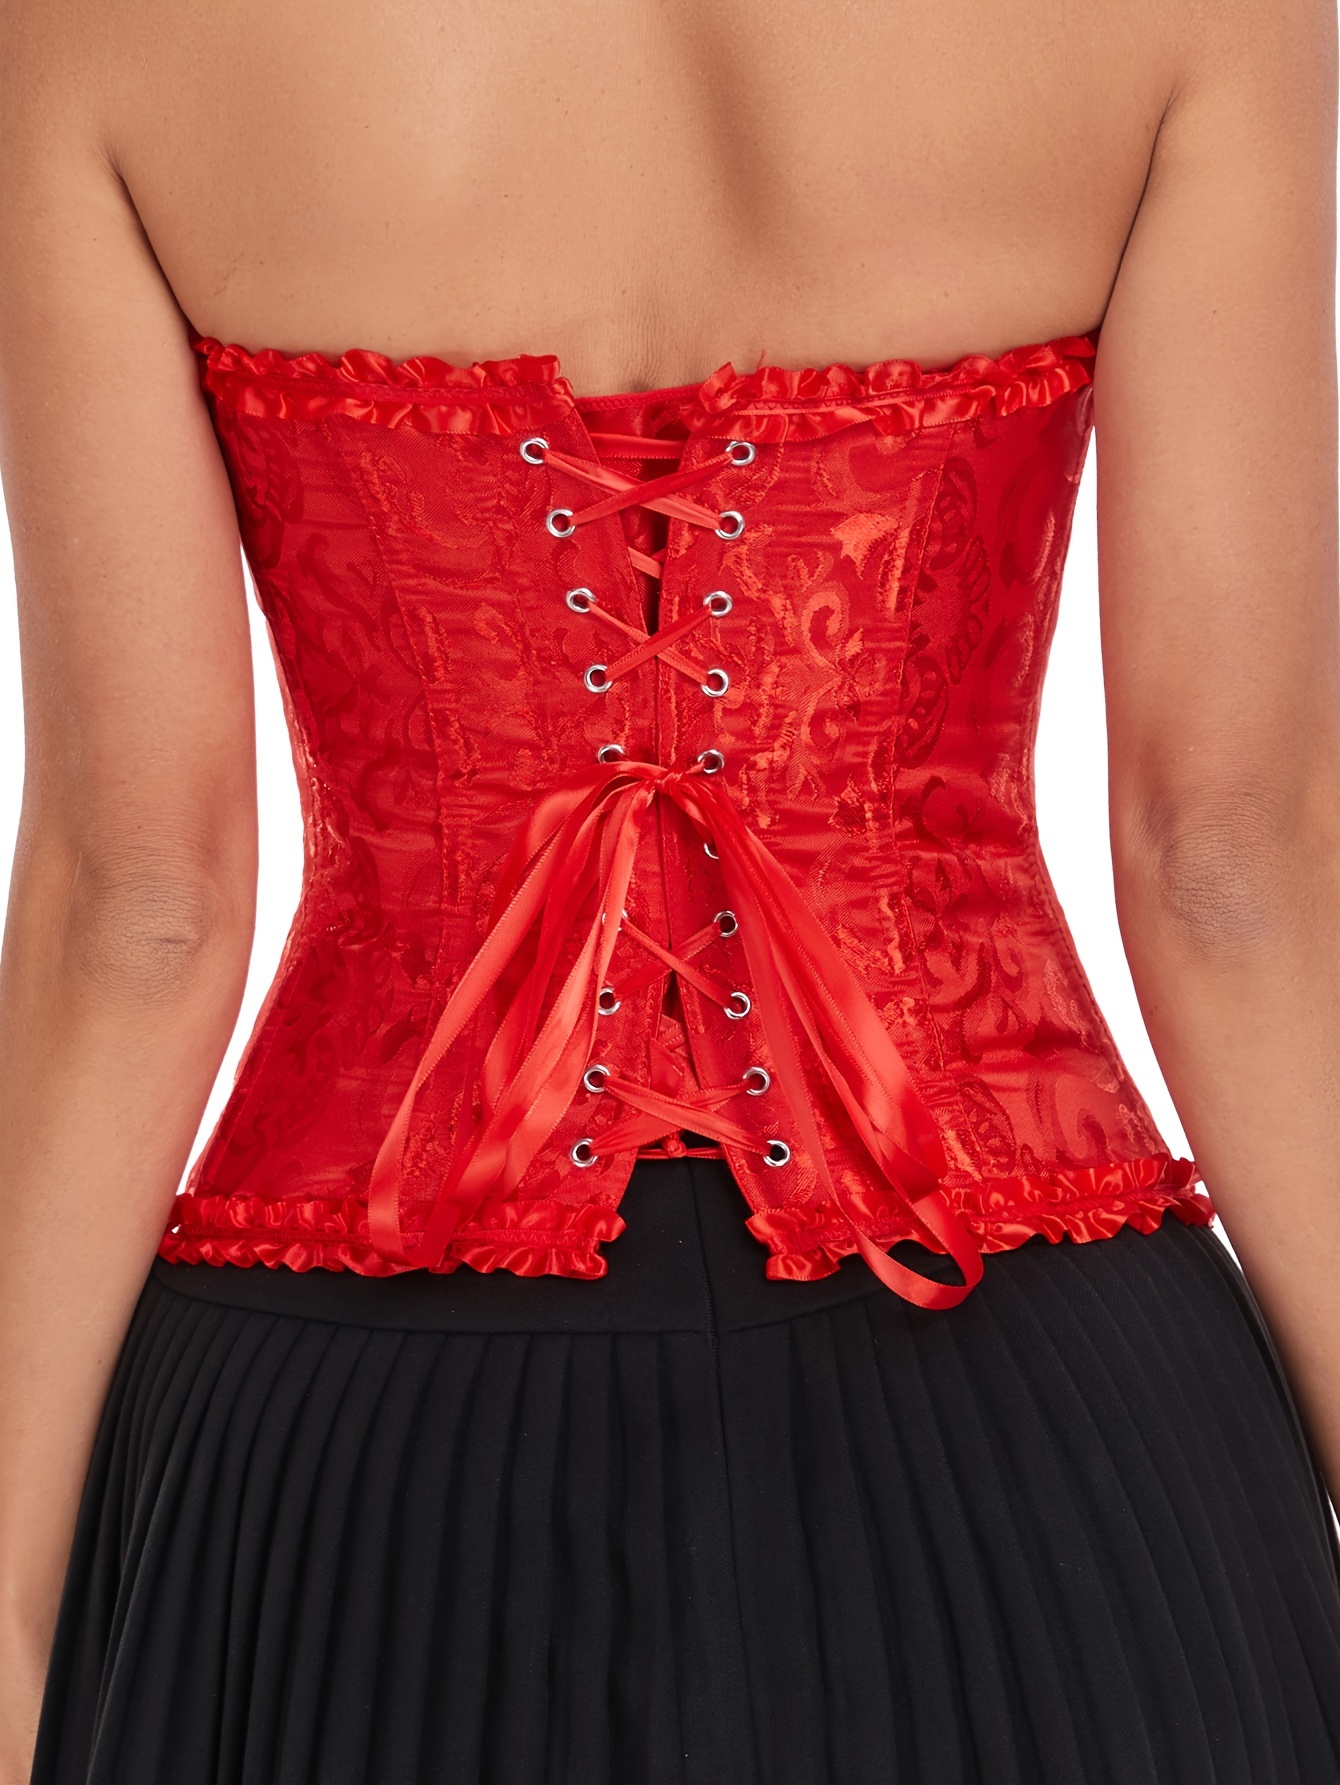 2023 Elegant Sexy Lady Tie Shoulder Floral Lace Up Back Cutout Curved Hem  Tight-Fitting Bustier Corset Shapewear Top